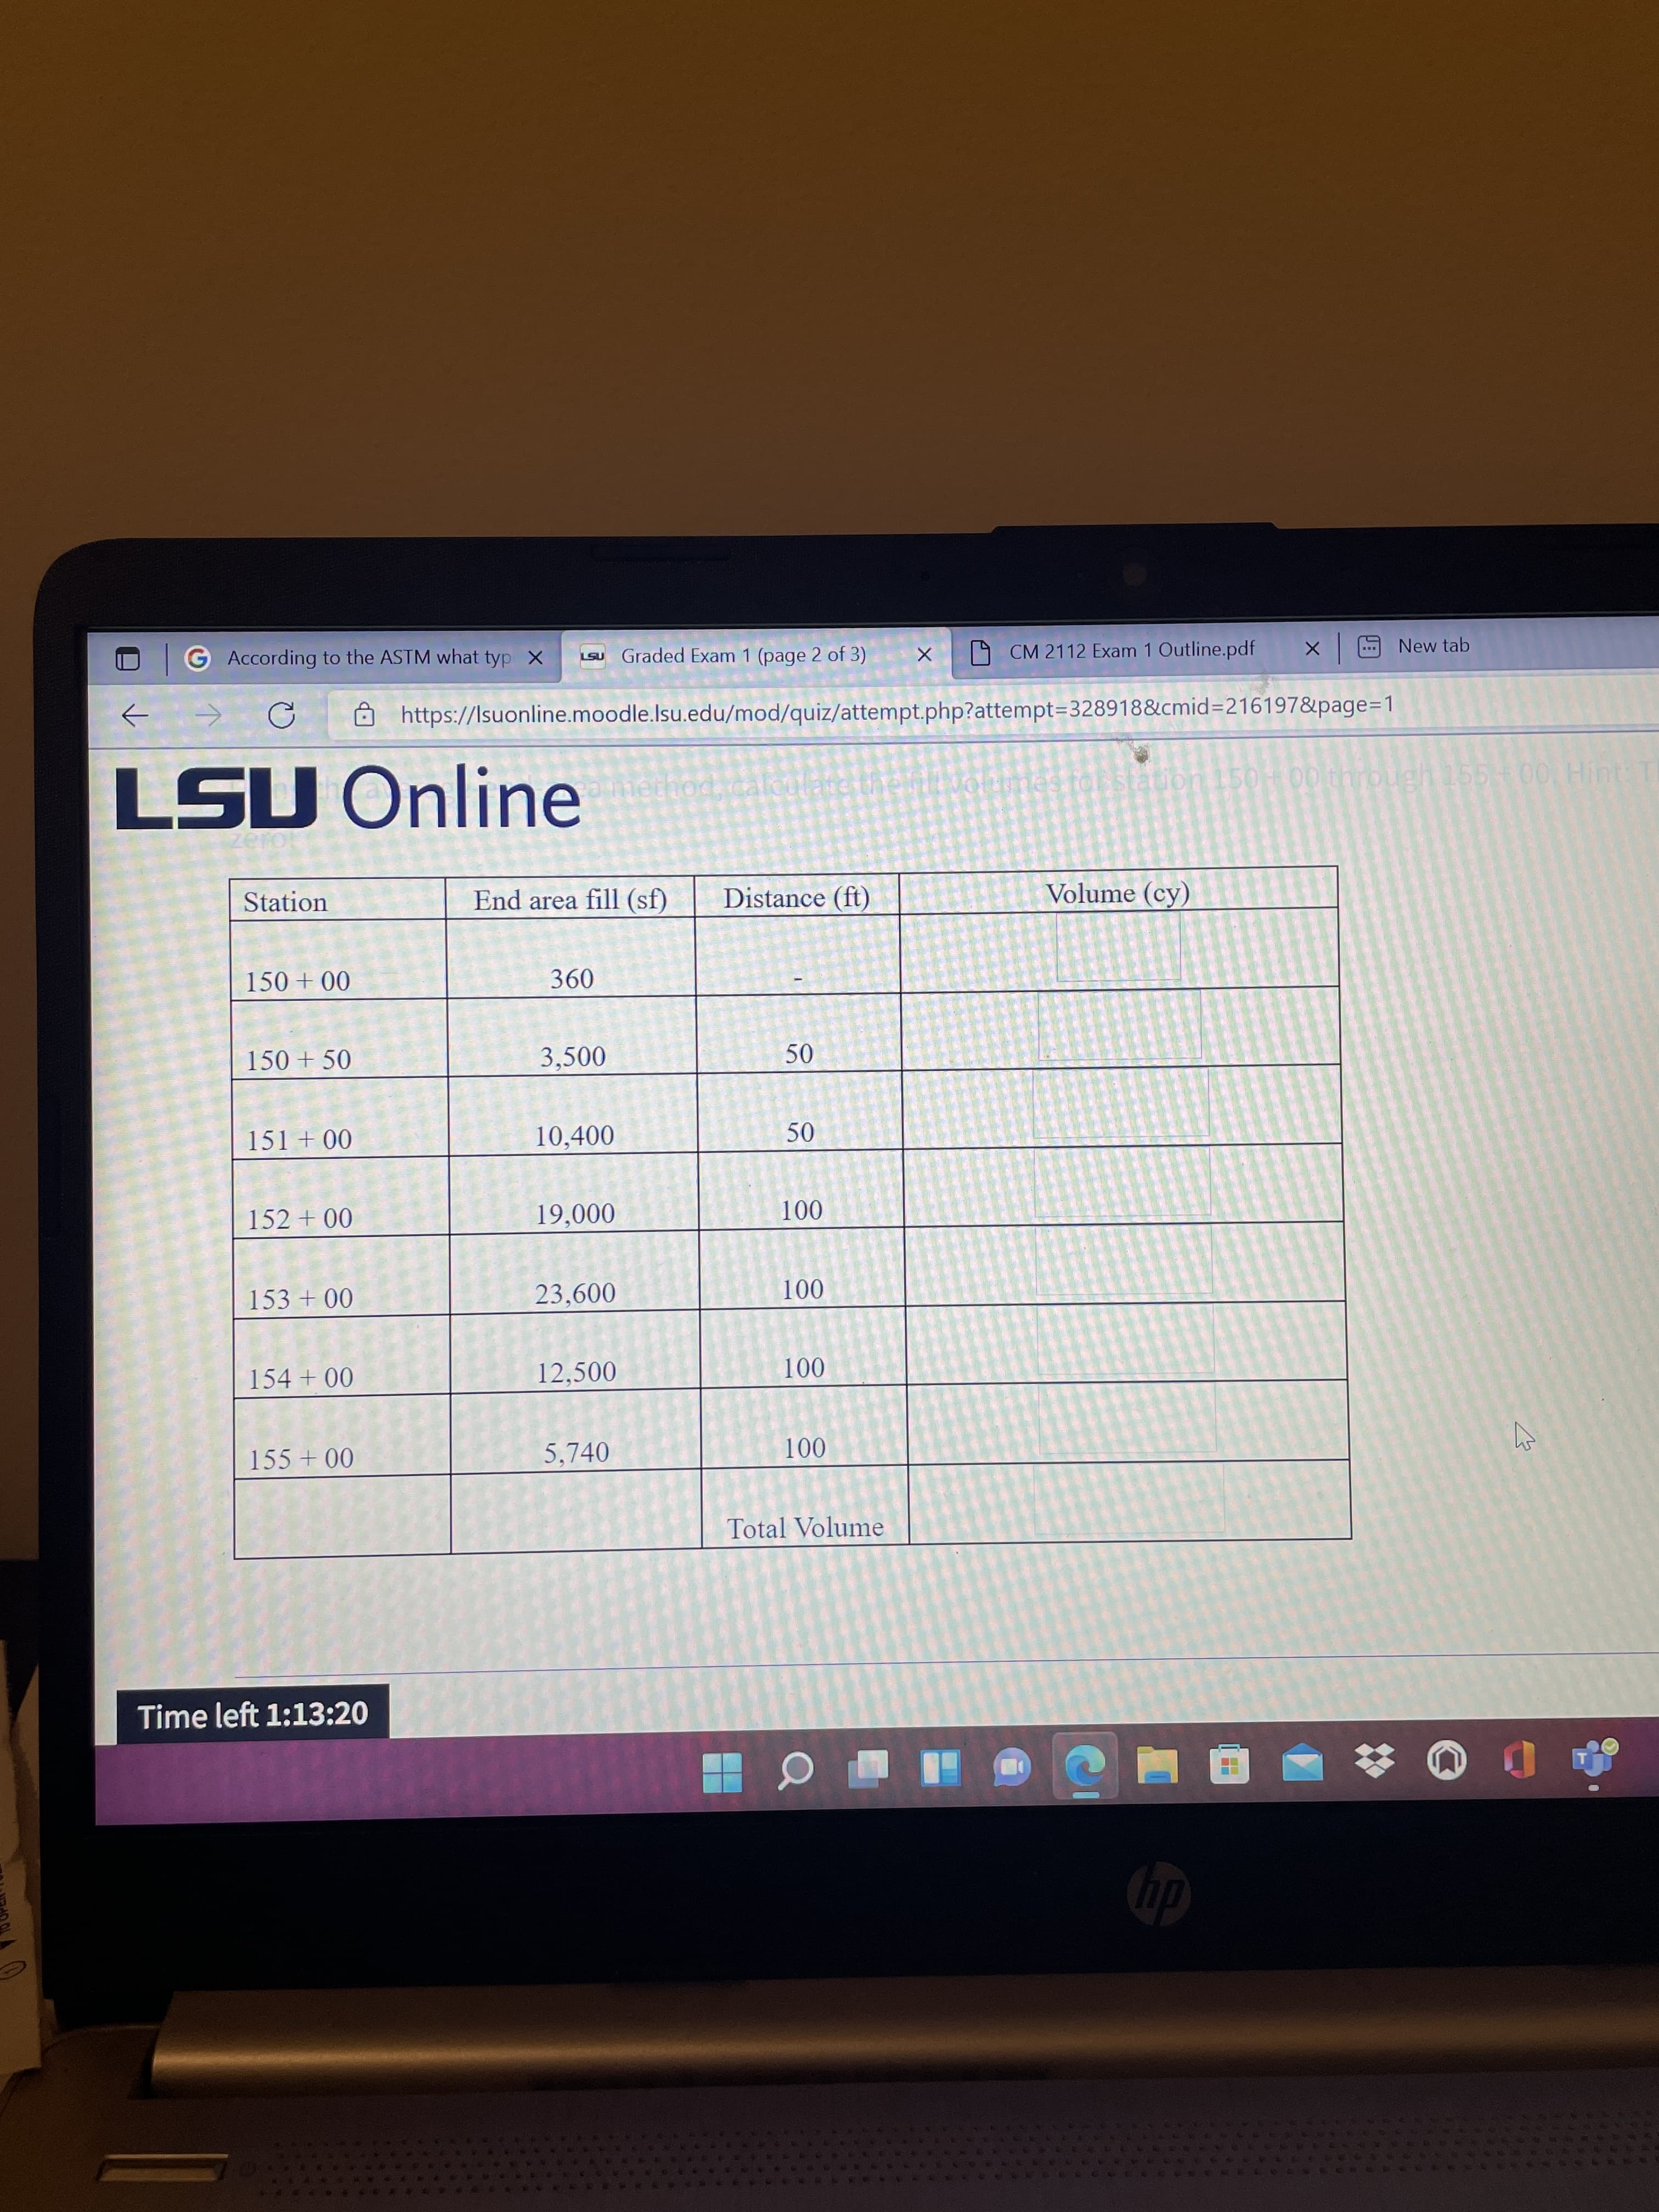 50
G According to the ASTM what typ X
LSU Graded Exam 1 (page 2 of 3)
X
D CM 2112 Exam 1 Outline.pdf
New tab
Ôhttps://Isuonline.moodle.lsu.edu/mod/quiz/attempt.php?attempt=328918&cmid=216197&page=1
LSU Online
mes to
on 150+00 through 155 + 00 Hint: T
Station
End area fill (sf)
Distance (ft)
Volume (cy)
360
00 + 0SI
150 + 50
3,500
10,400
50
00 + ISI
152 + 00
000
00 0
23,600
00 + E
00 1
12,500
00 +0
00 0
5,740
00 + SS
Total Volume
Time left 1:13:20
